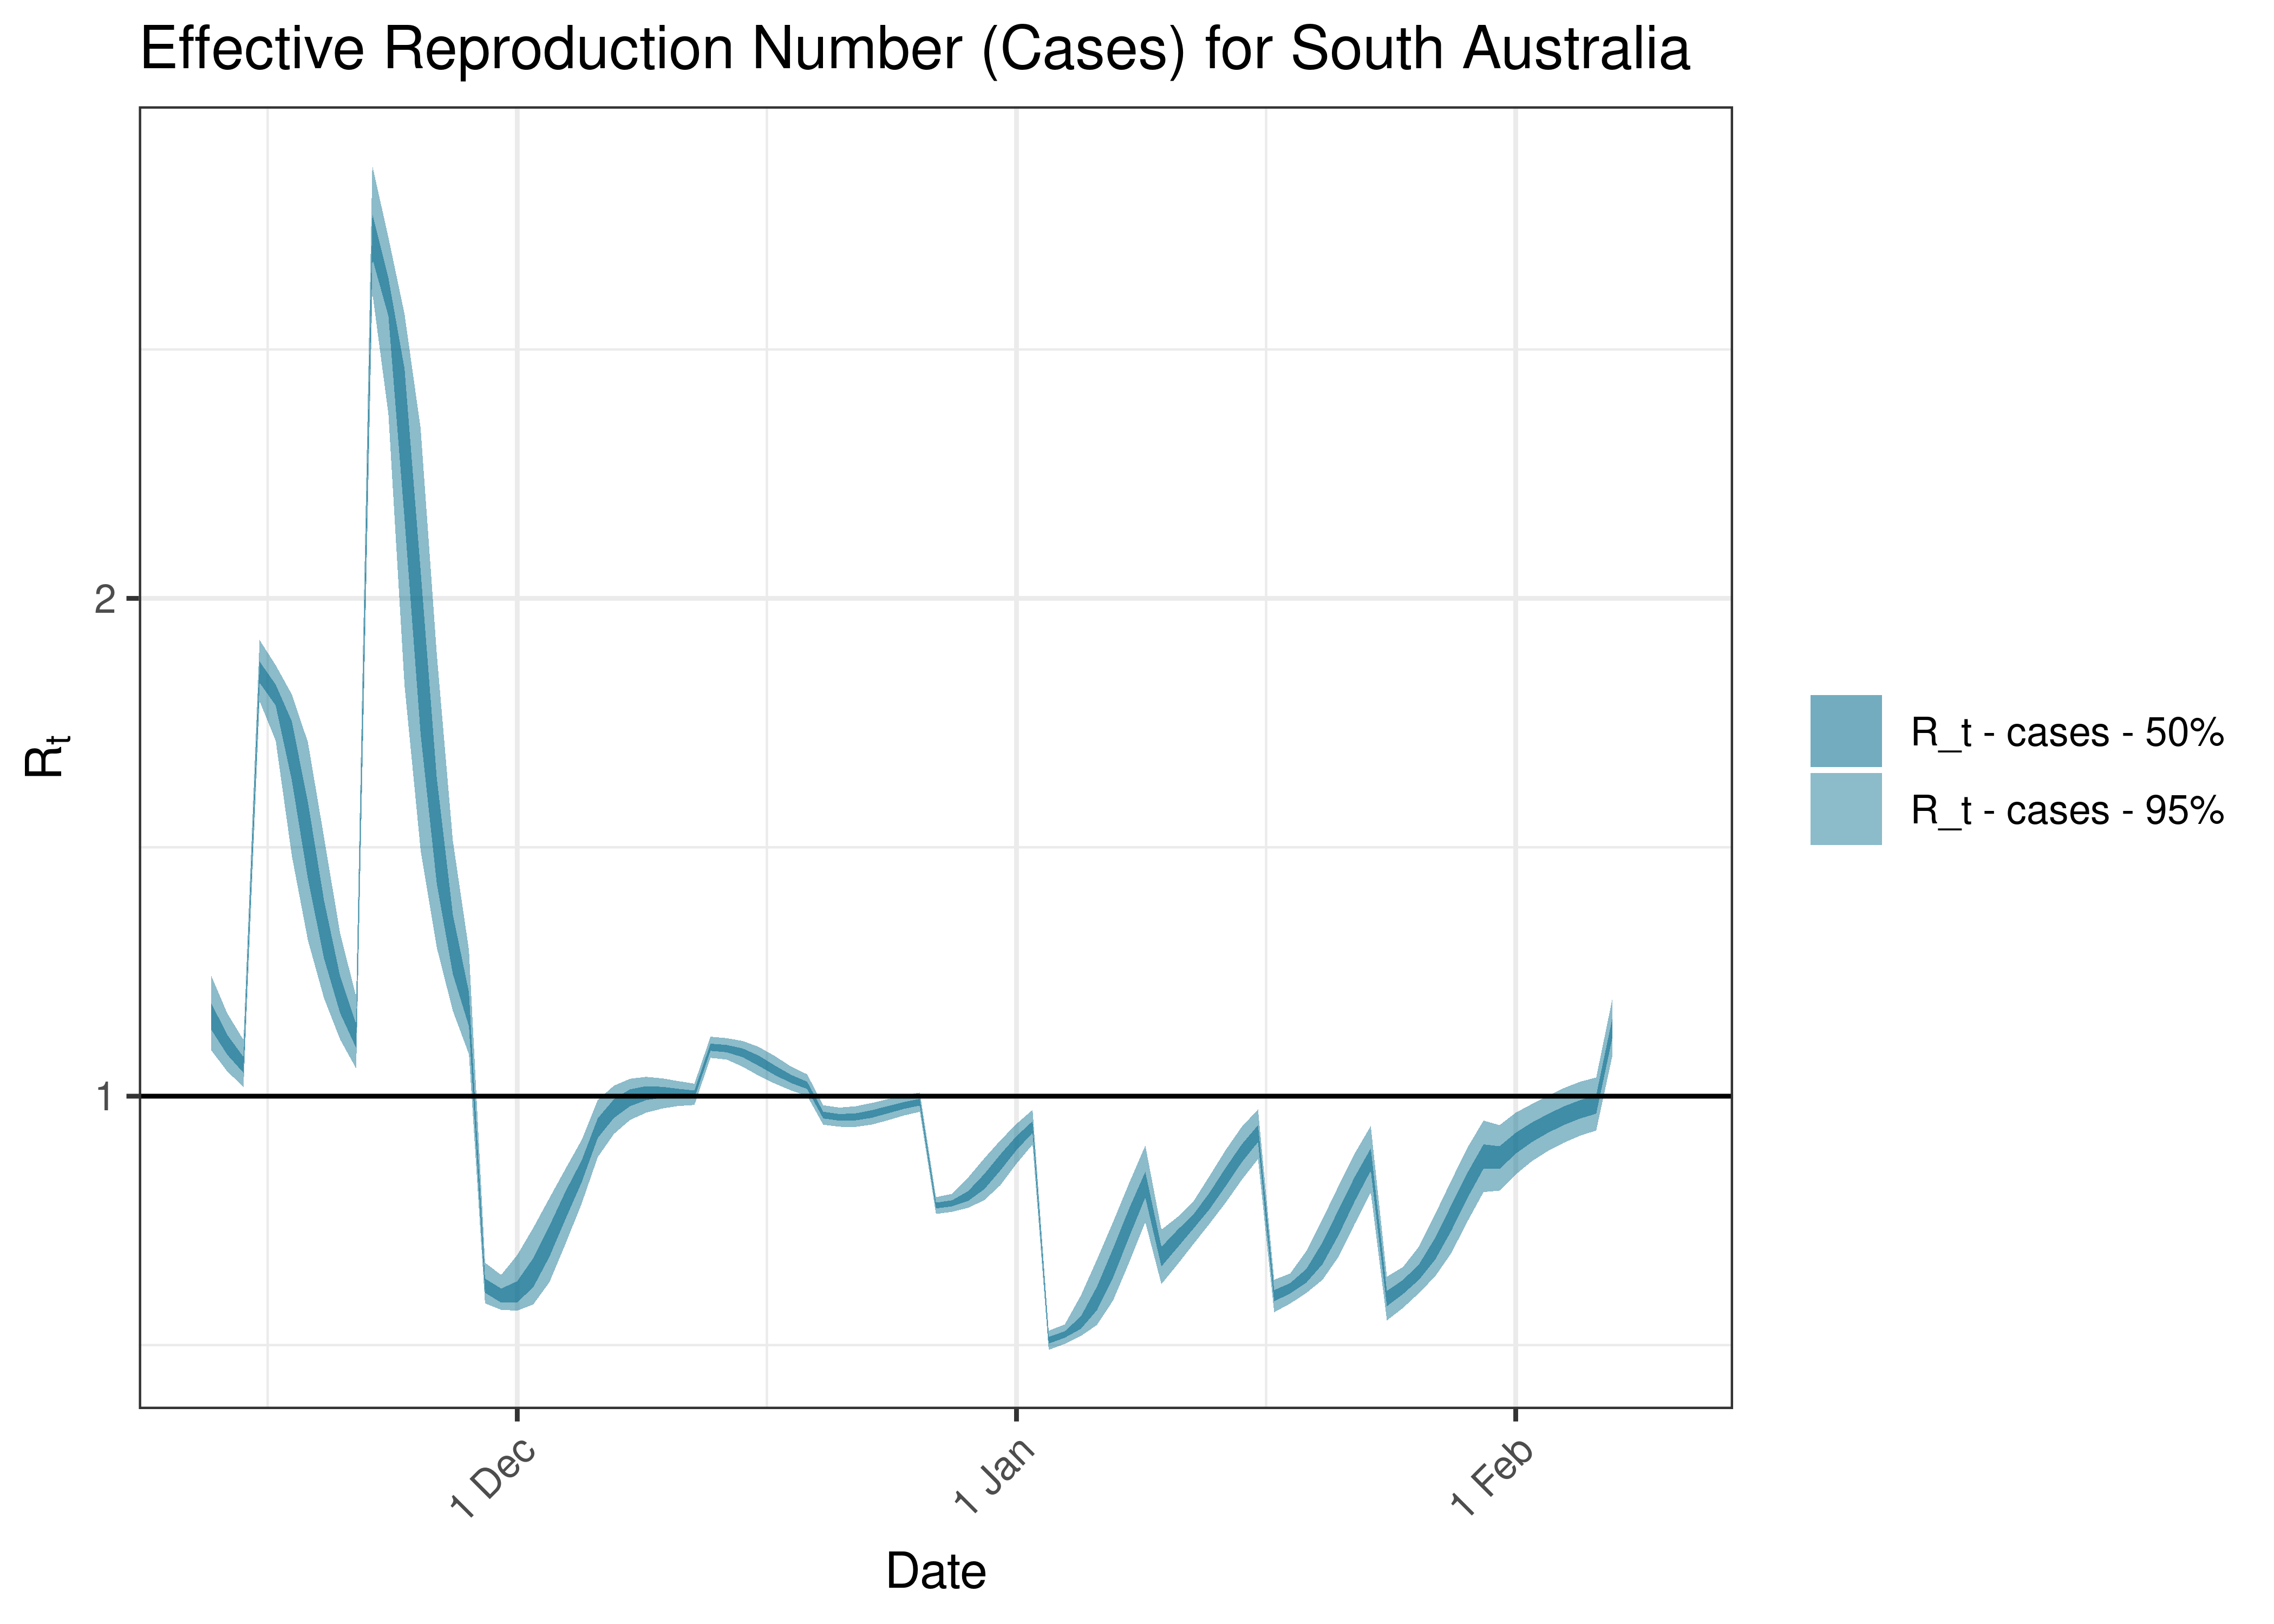 Estimated Effective Reproduction Number Based on Cases for South Australia over last 90 days